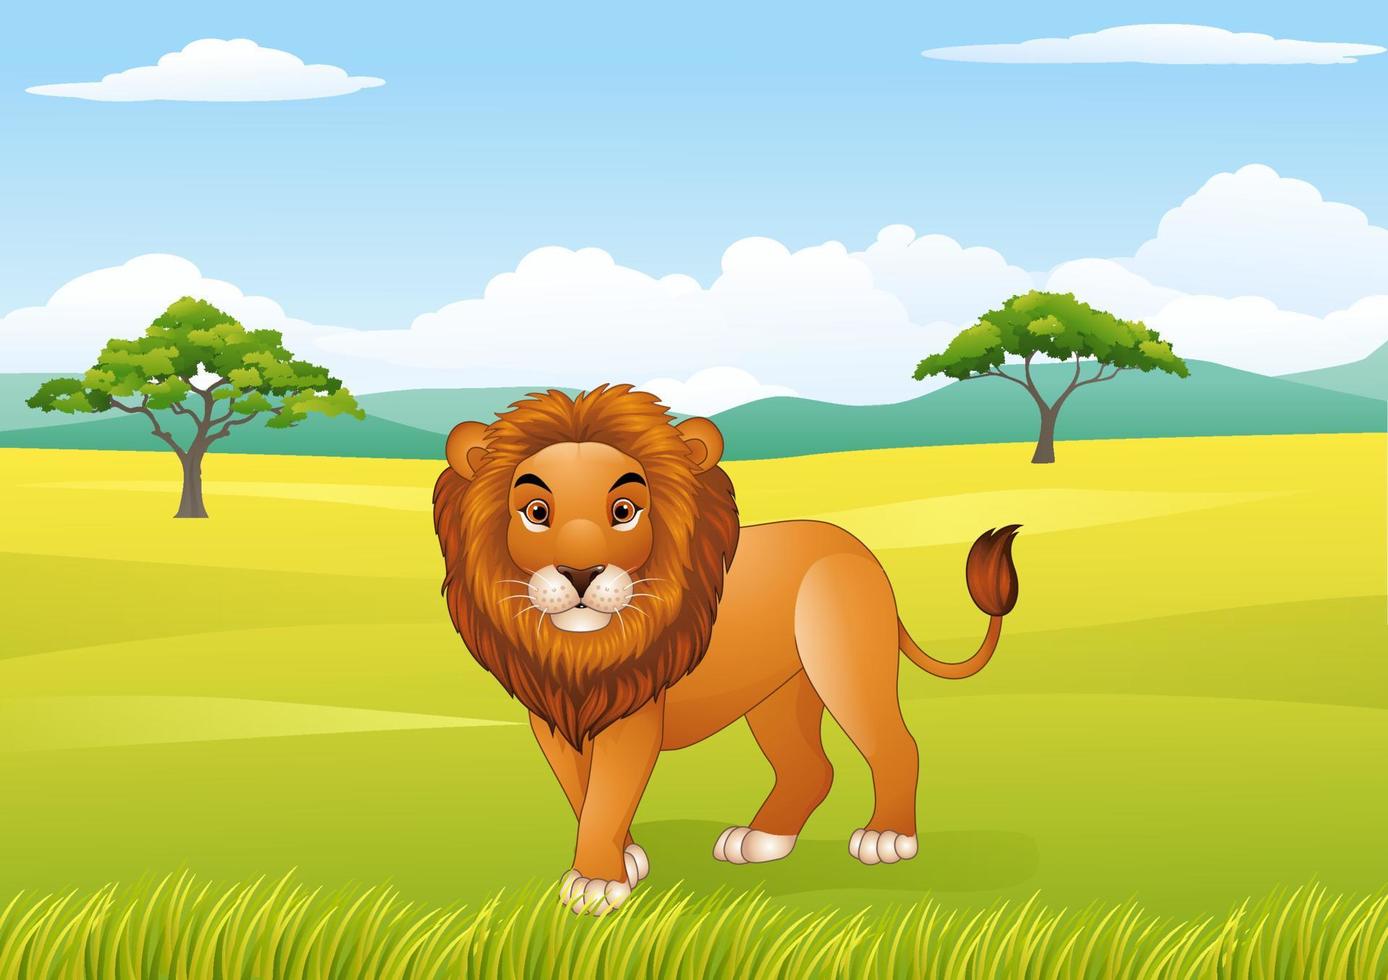 Cartoon lion with African landscape background vector